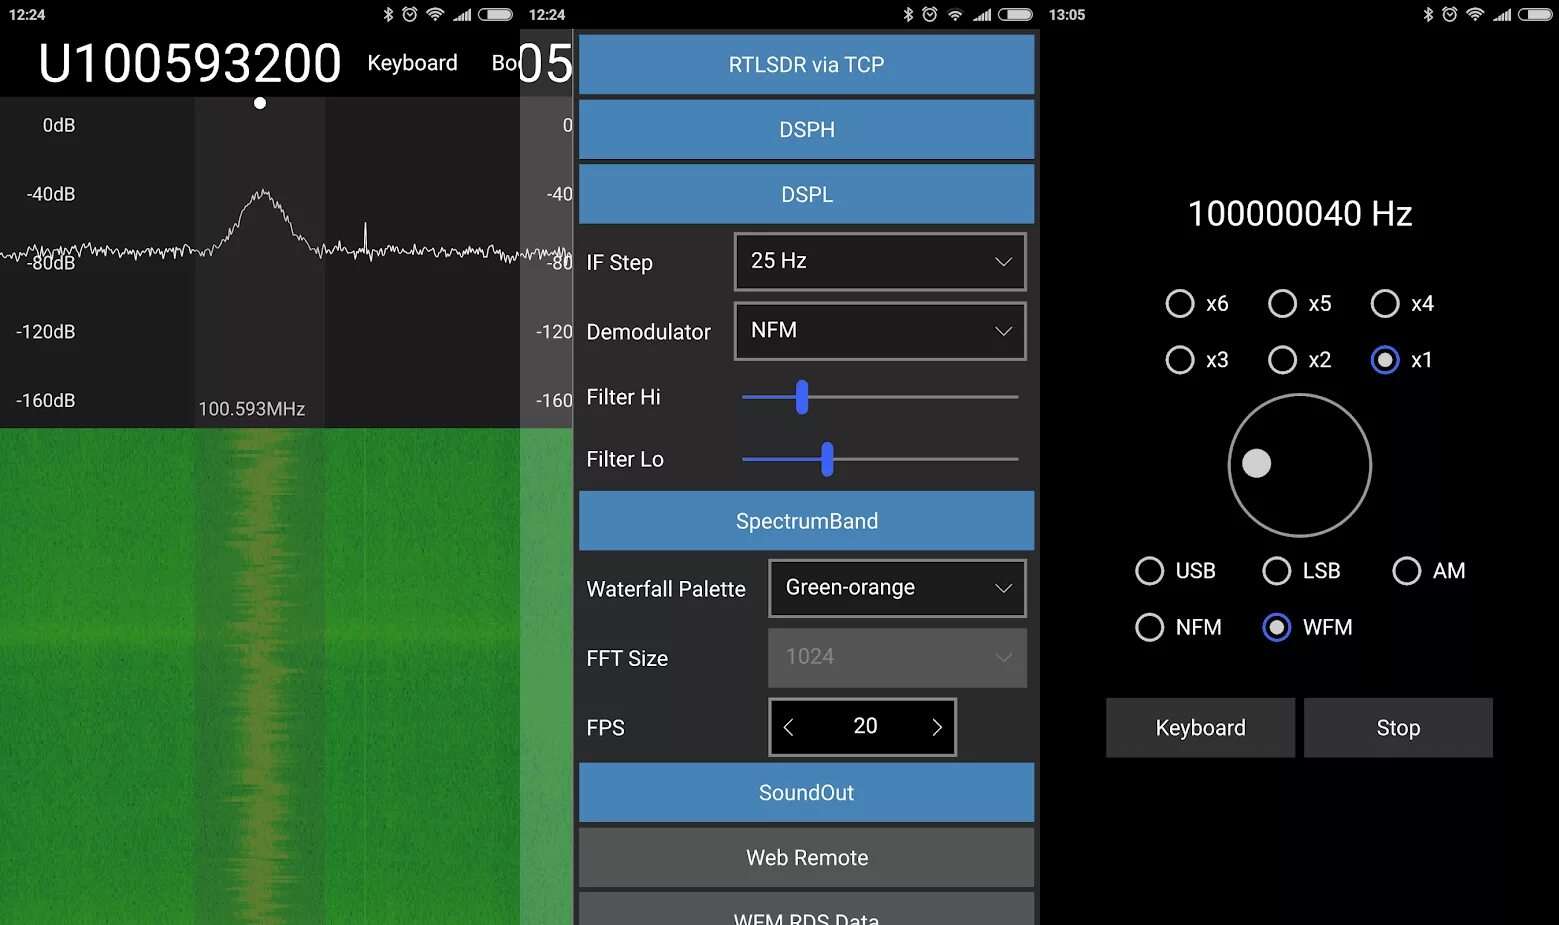 Sdr android. RTL SDR Android. SDR Touch Android SDR. SDR радиоприемник для андроид. SDRSHARP для андроид.